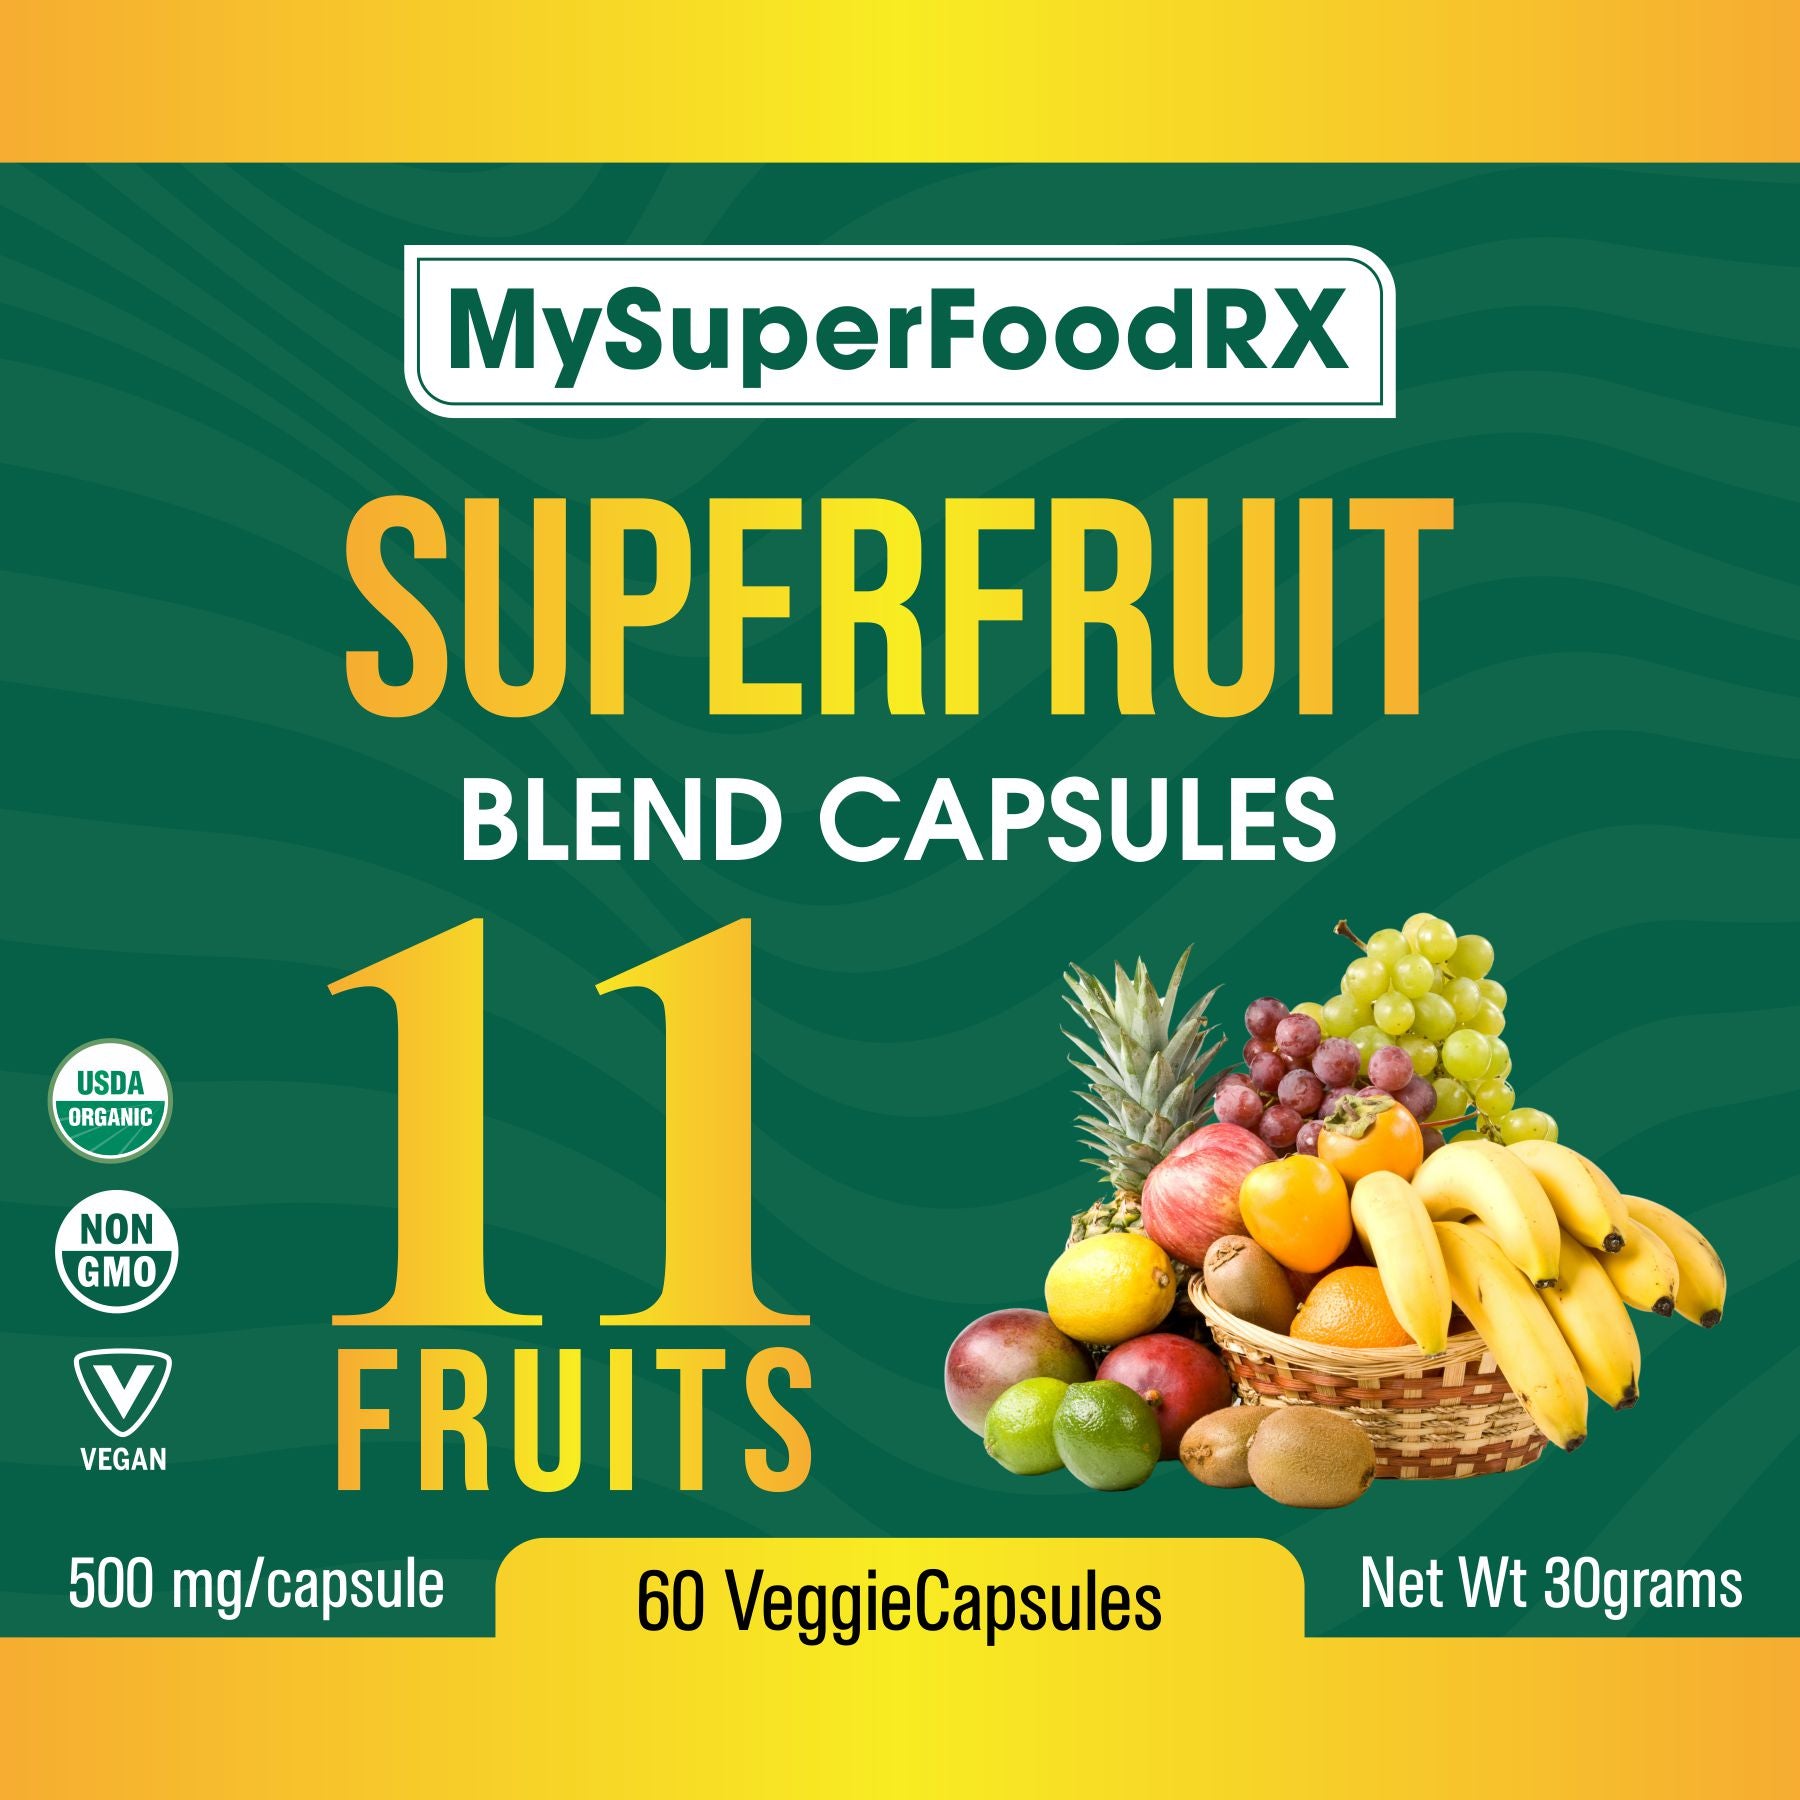 my superfood rx superfruit blend capsules